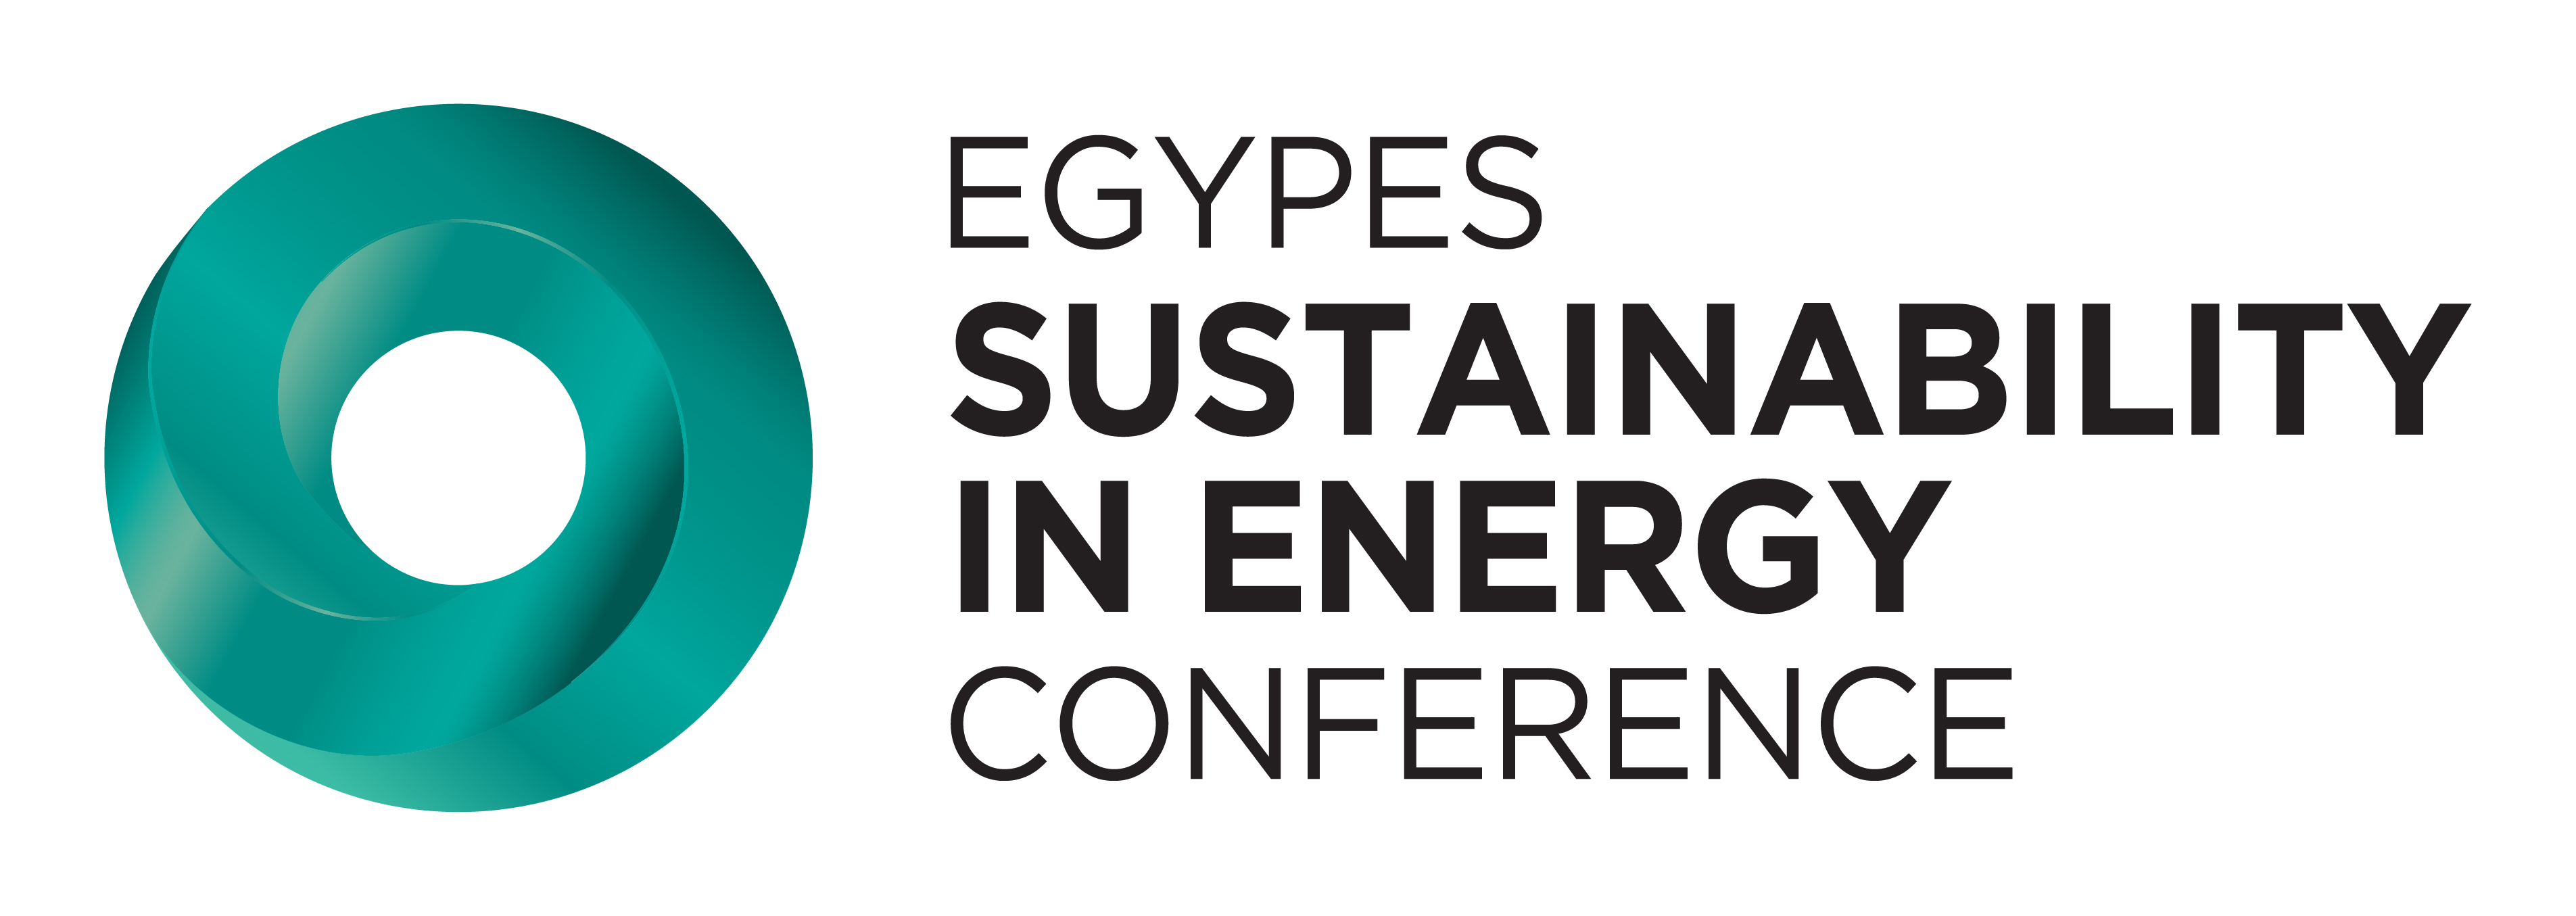 EGYPES SIE Conf Logo Without MOP